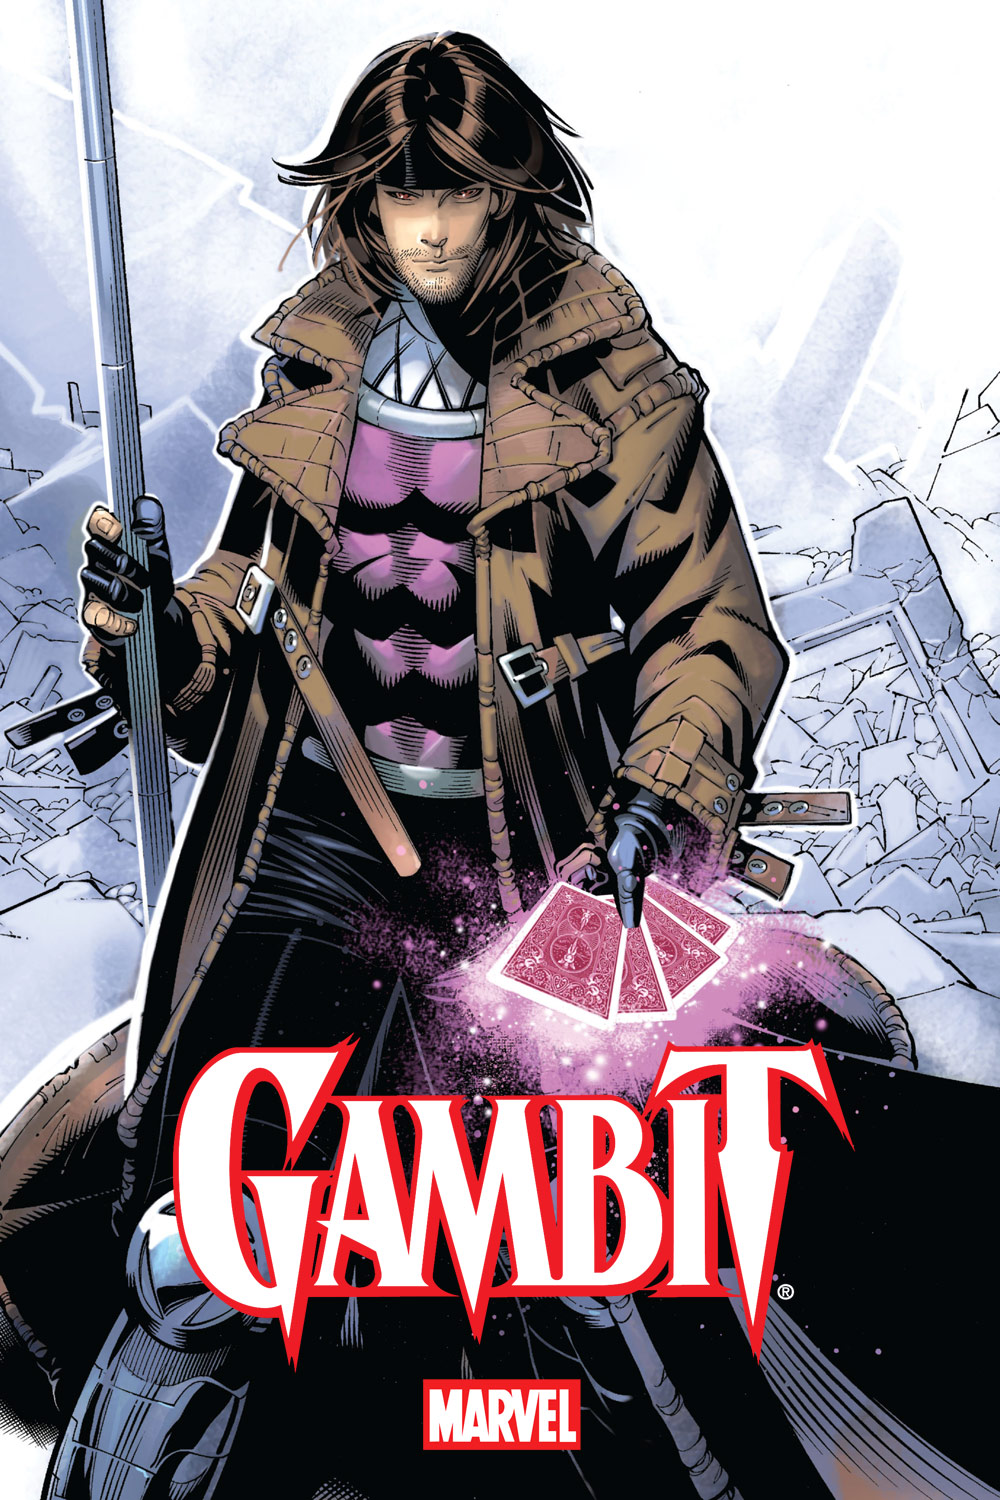 the final gambit release date paperback